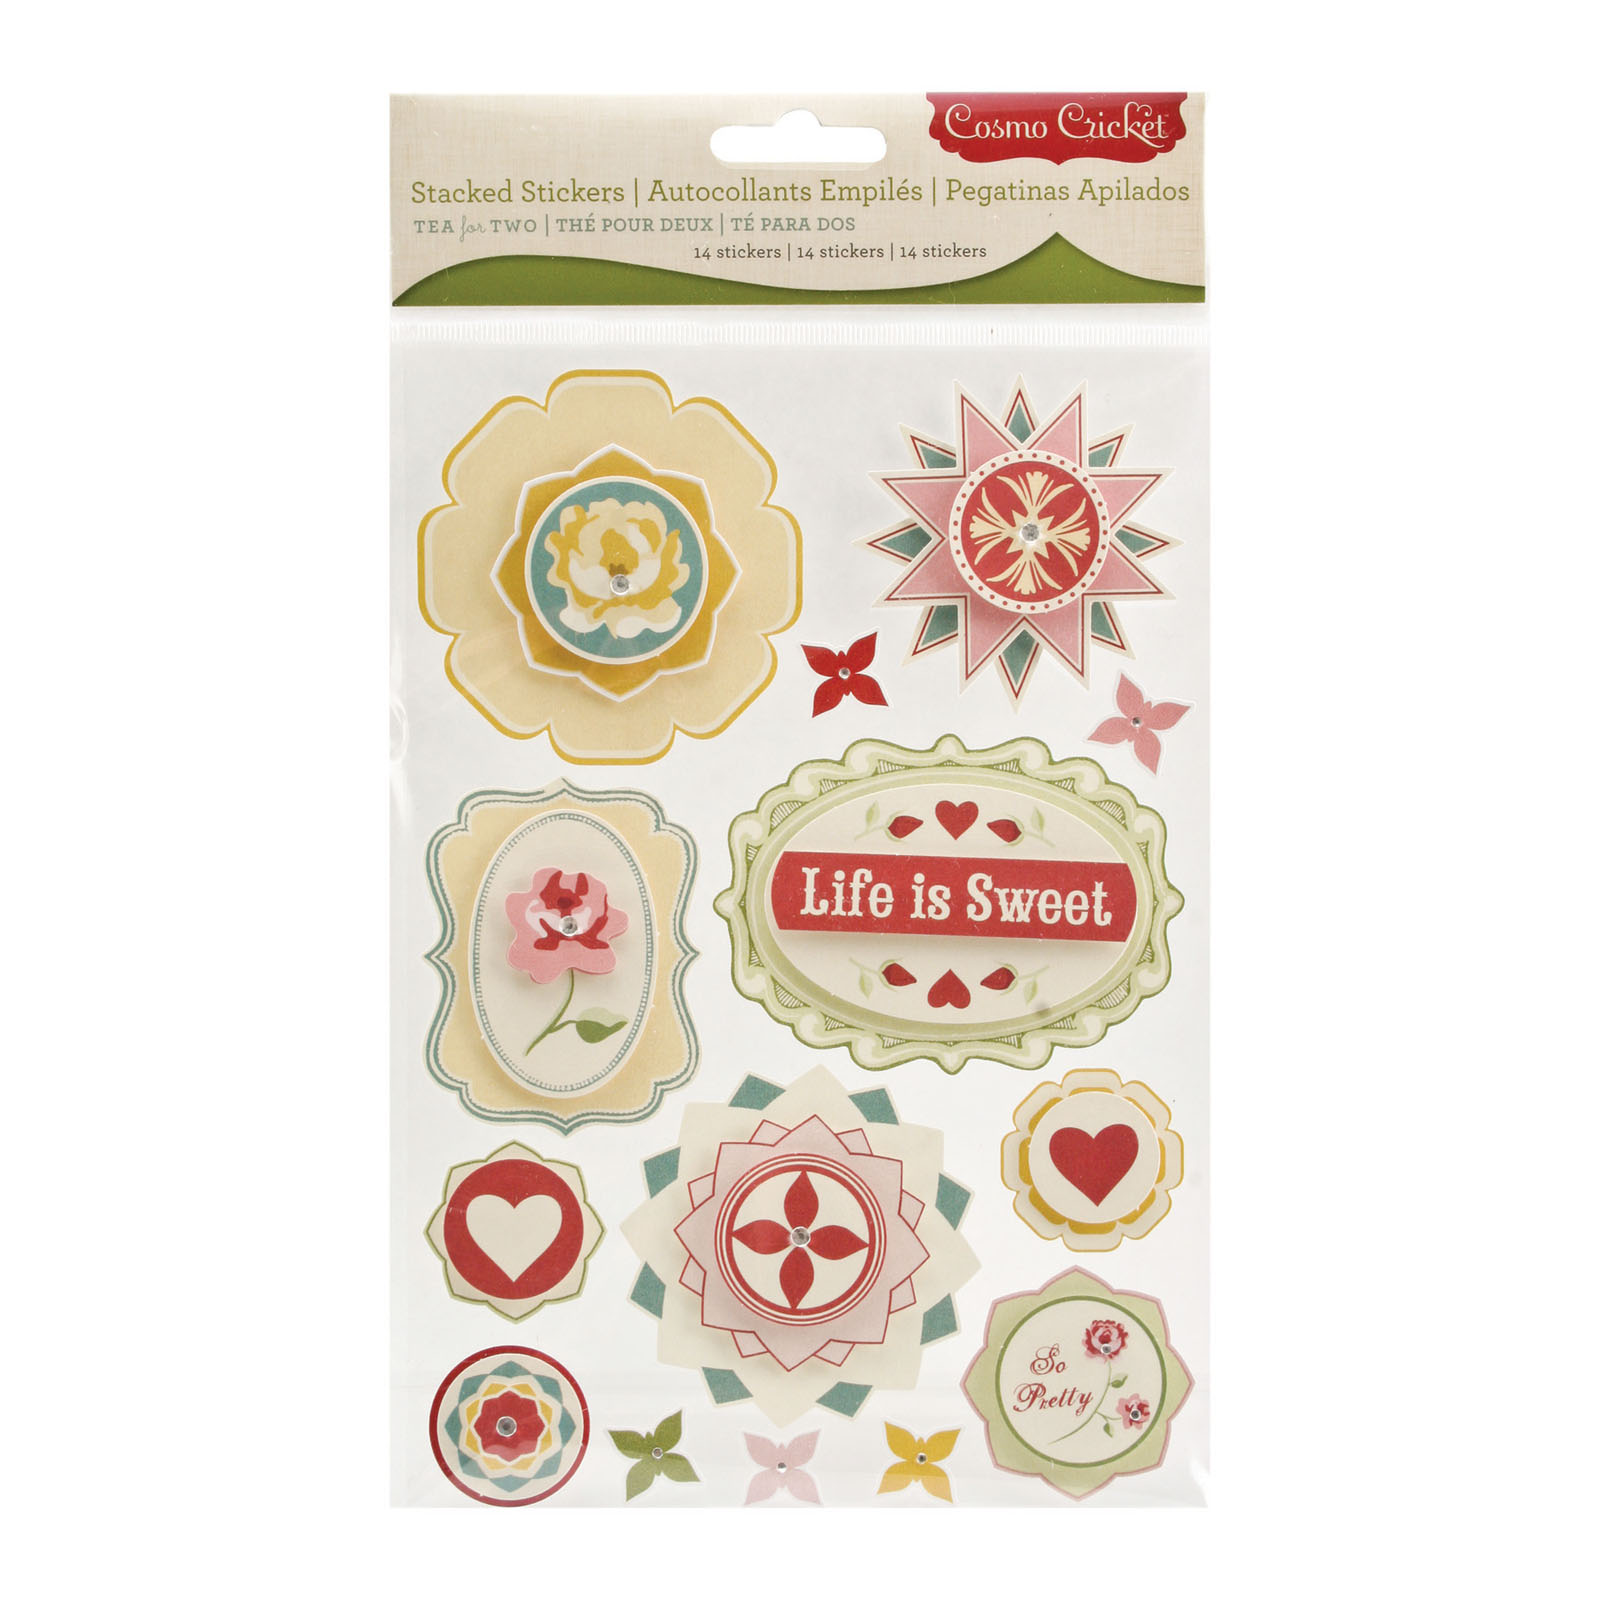 Cosmo cricket • Tea for two 3D stickers 14pcs